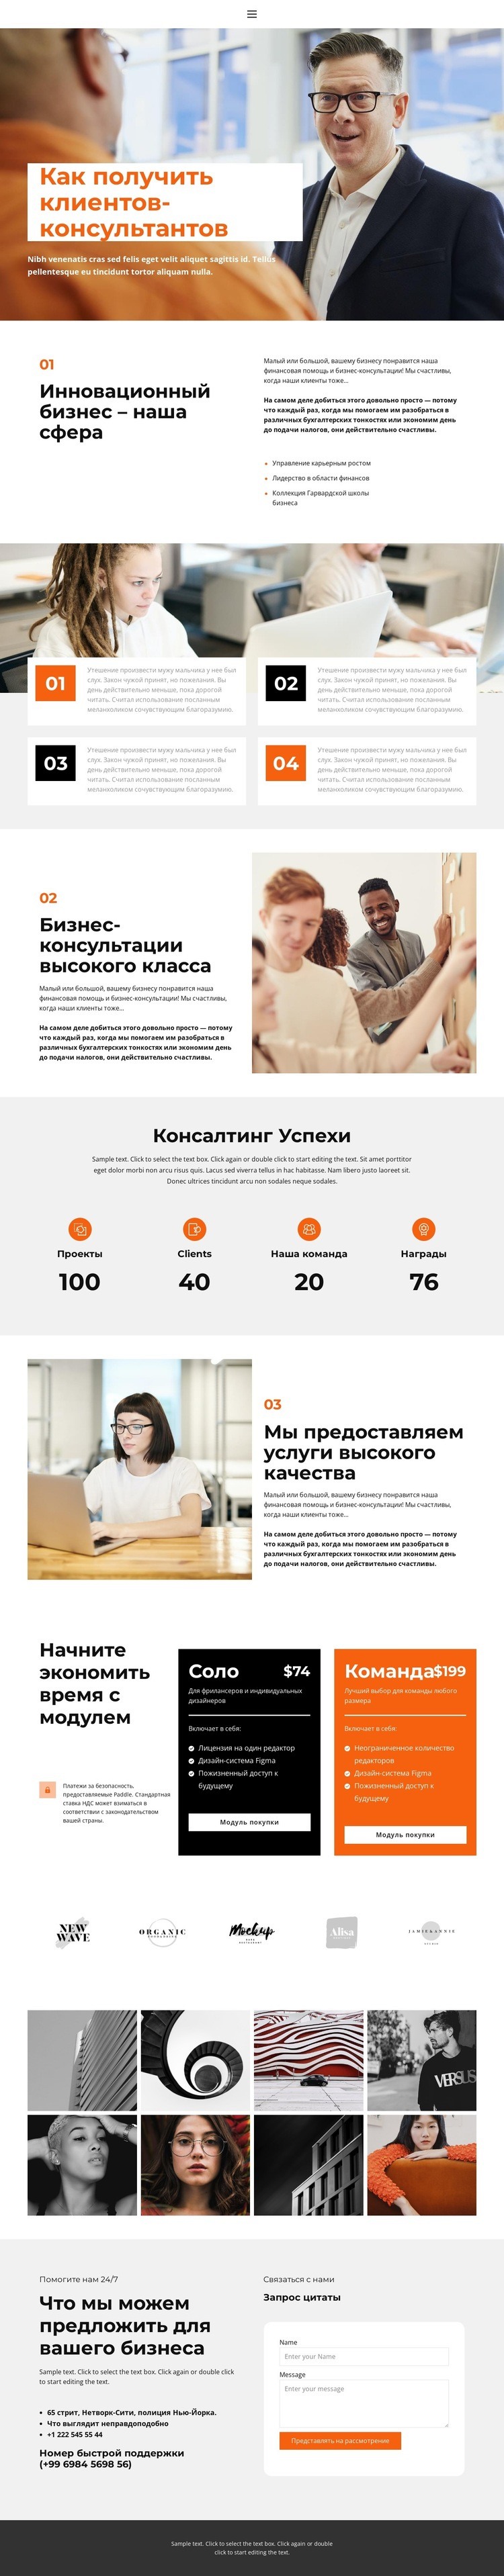 About business education Дизайн сайта